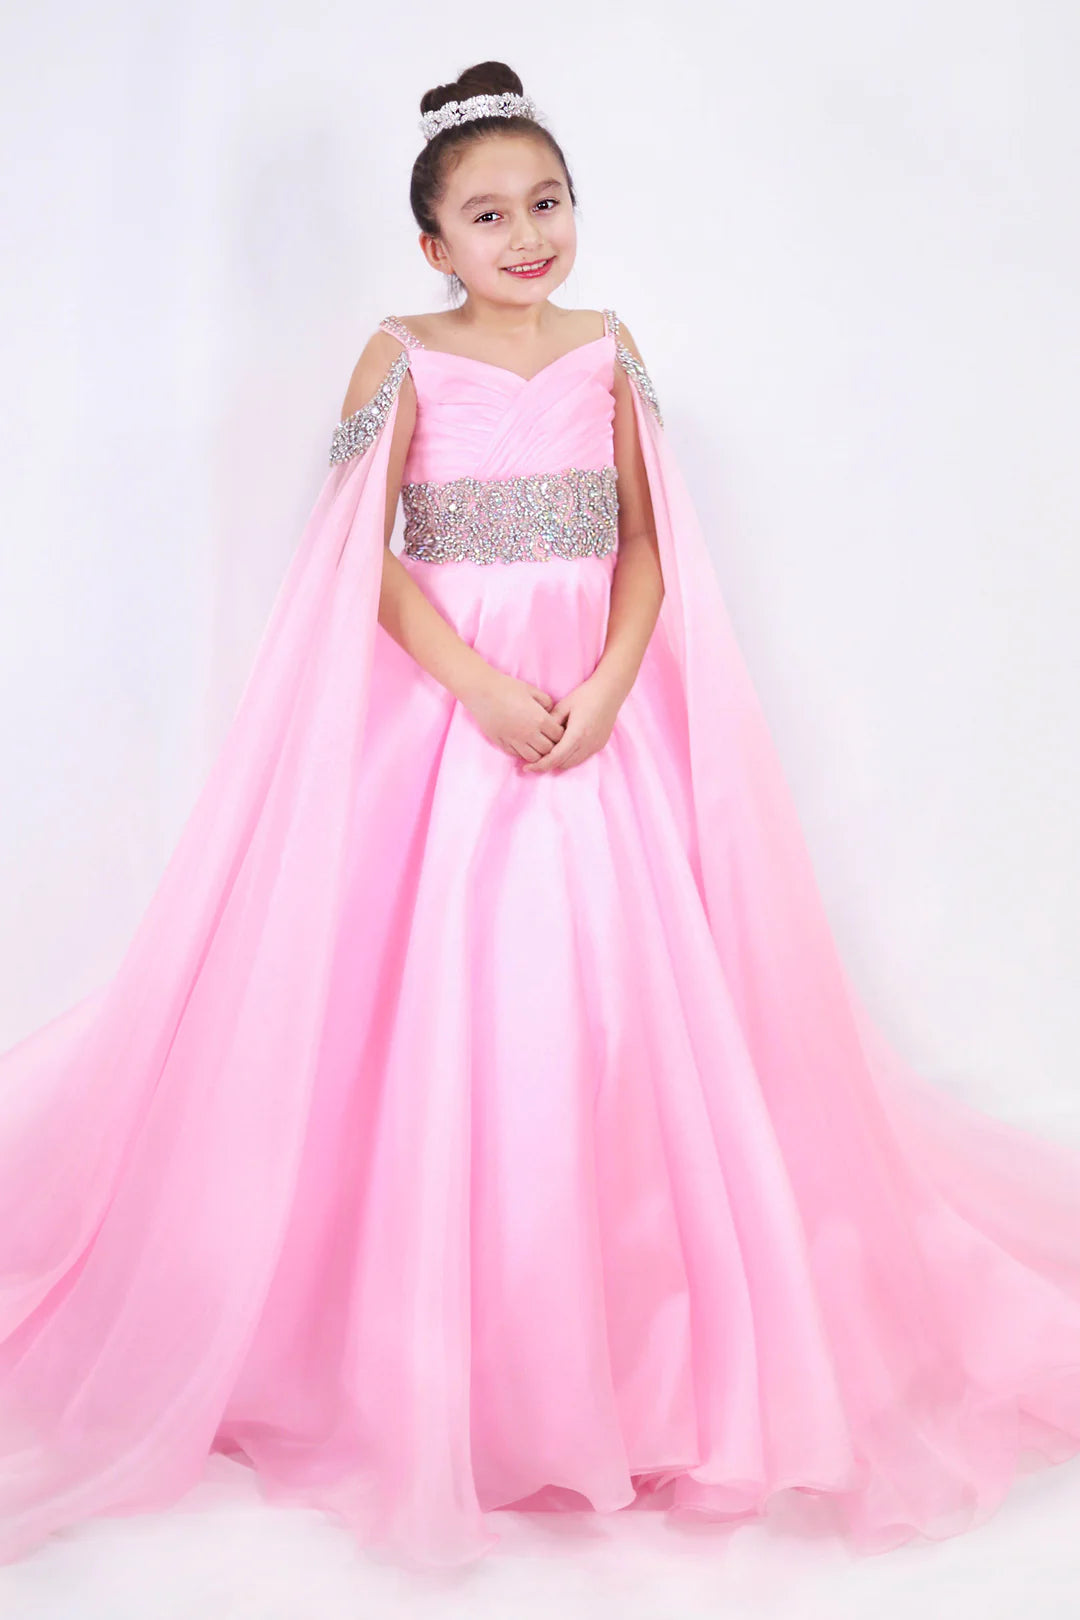 Ava Presley 27731 Girls Pageant Dress with Cape